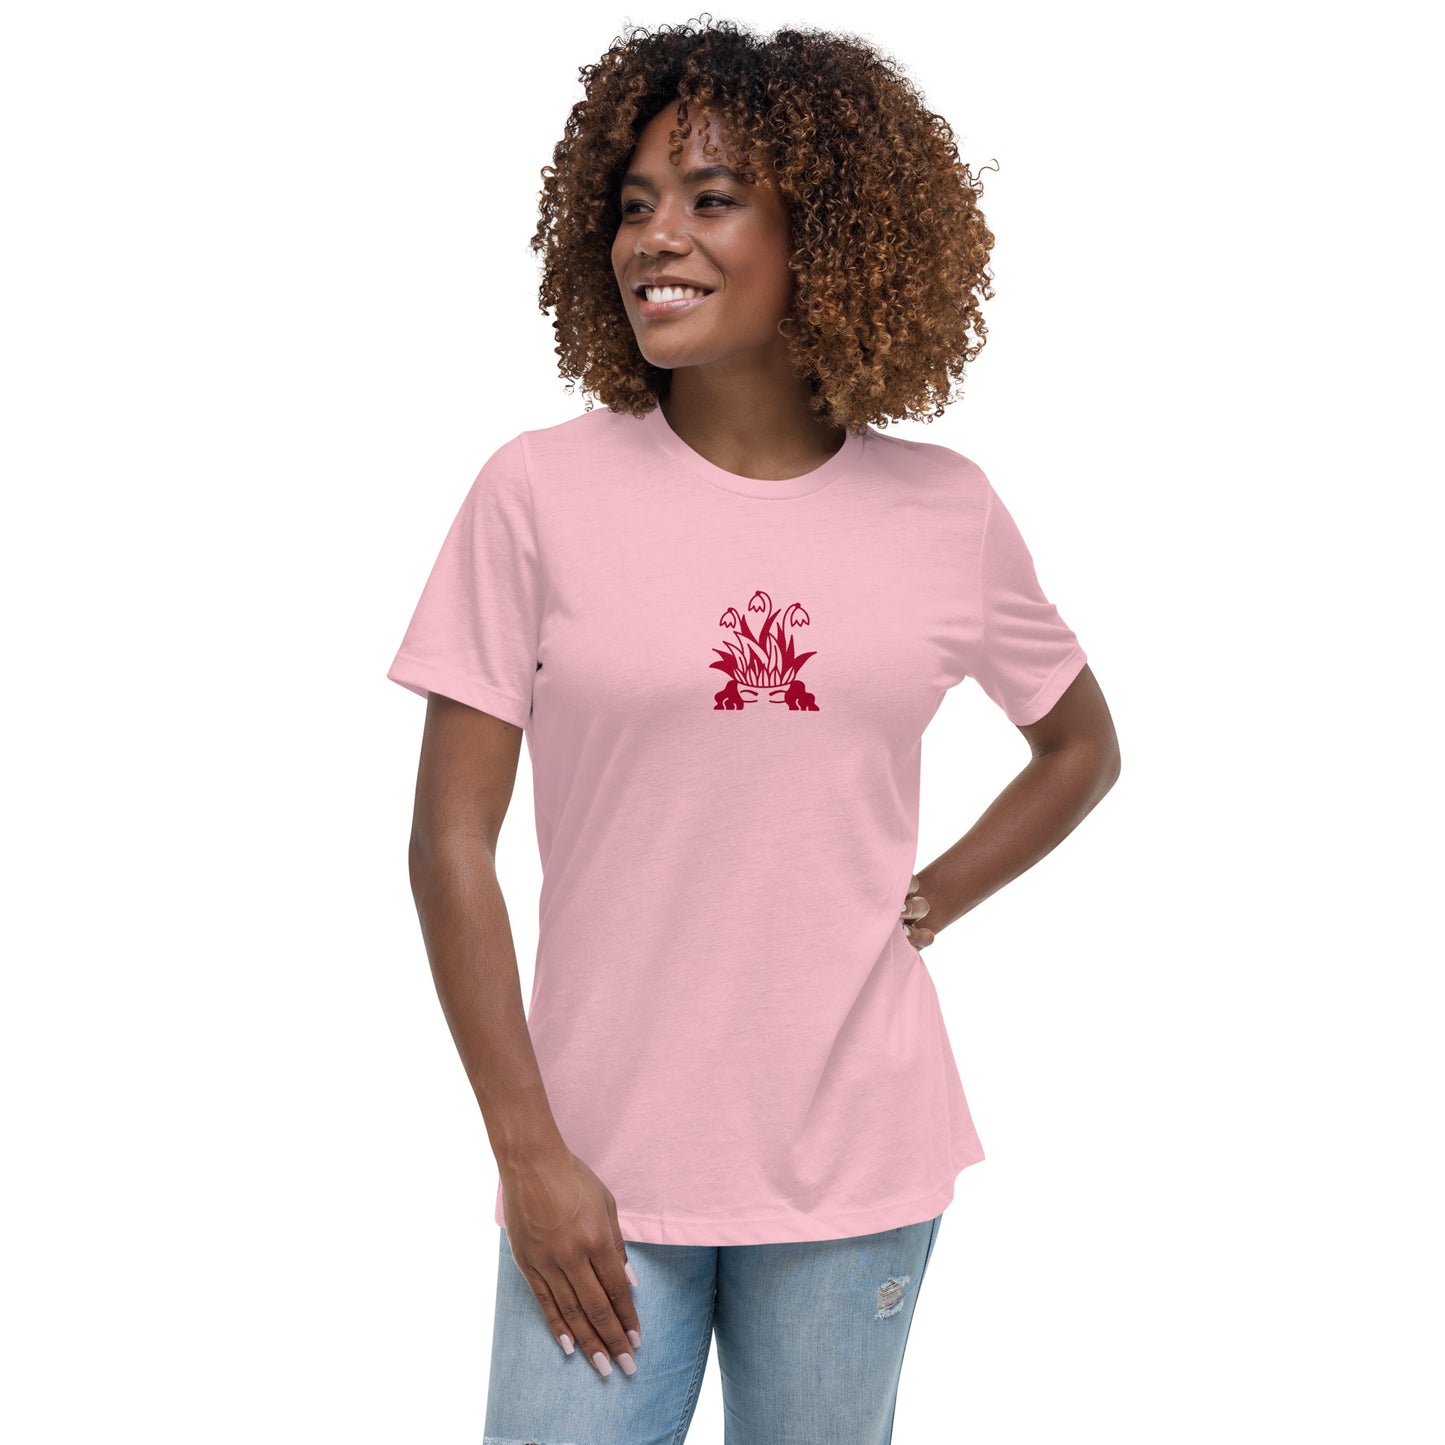 Adonis-Creations - Women's Relaxed Mindfulness T-Shirt